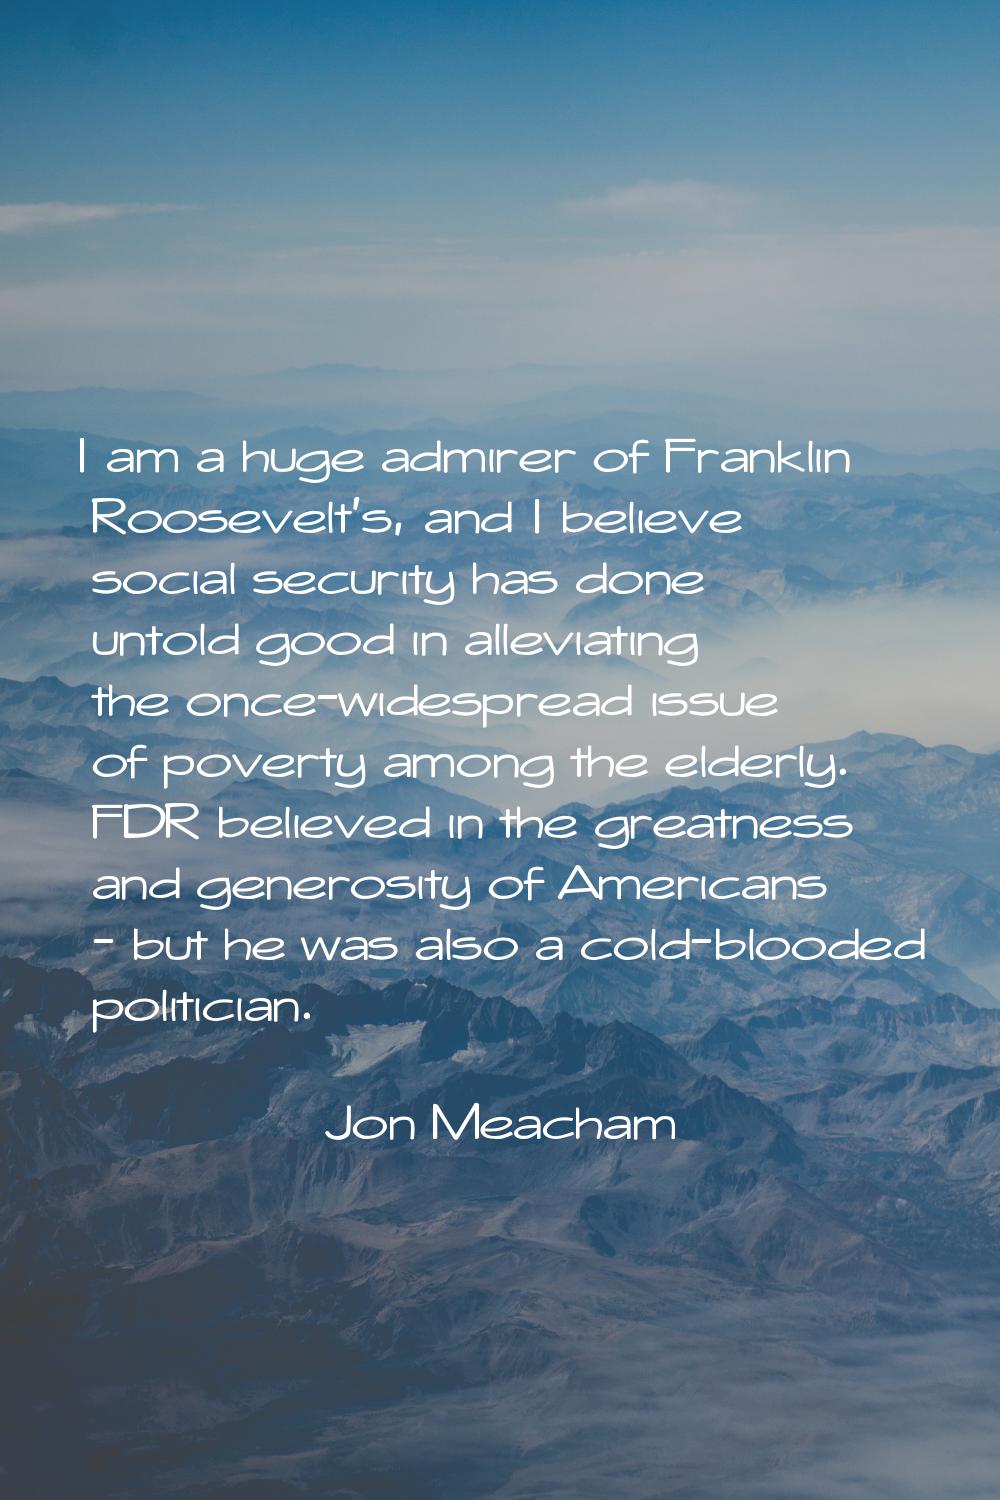 I am a huge admirer of Franklin Roosevelt's, and I believe social security has done untold good in 